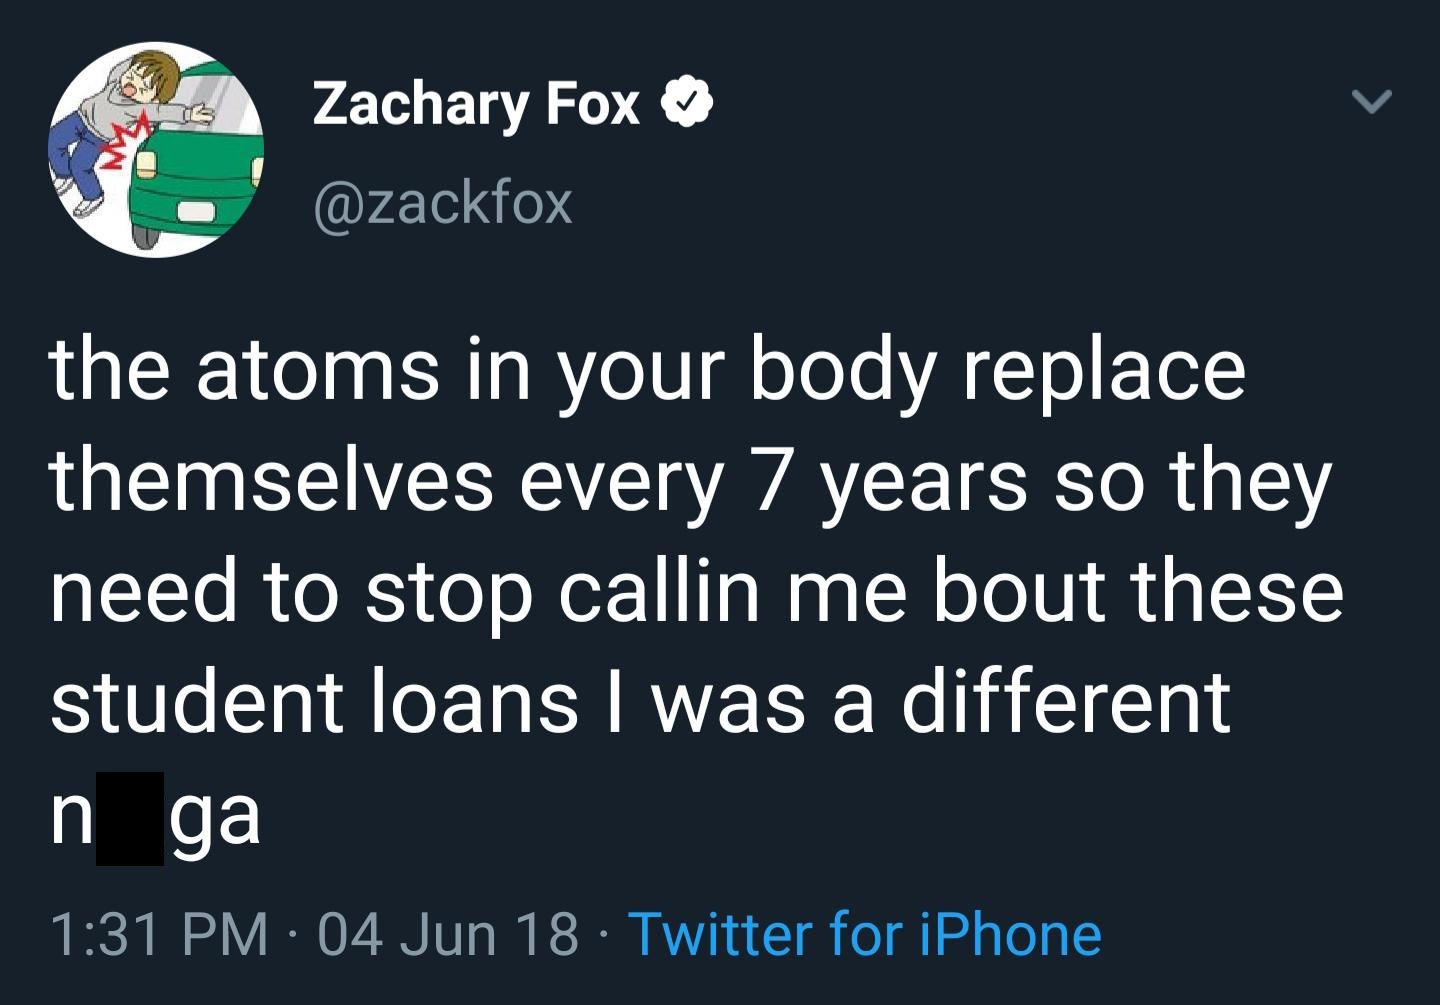 presentation - Zachary Fox the atoms in your body replace themselves every 7 years so they need to stop callin me bout these student loans I was a different n ga 04 Jun 18 Twitter for iPhone